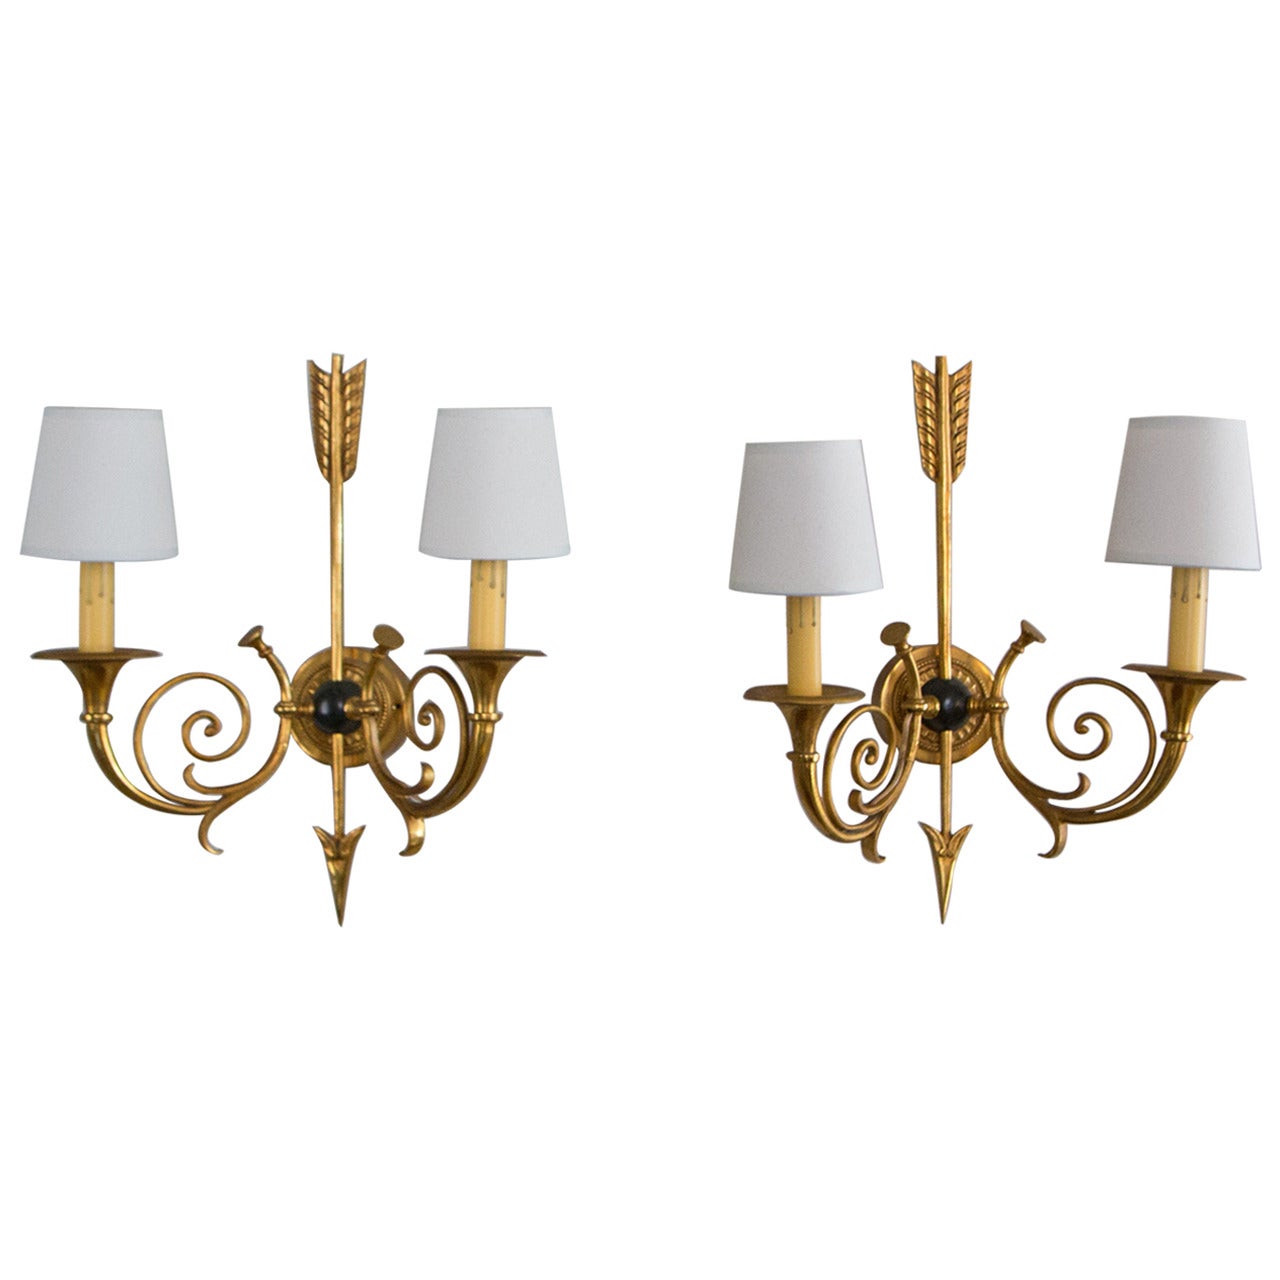 Pair of Two-Arm Empire Style Wall Sconces